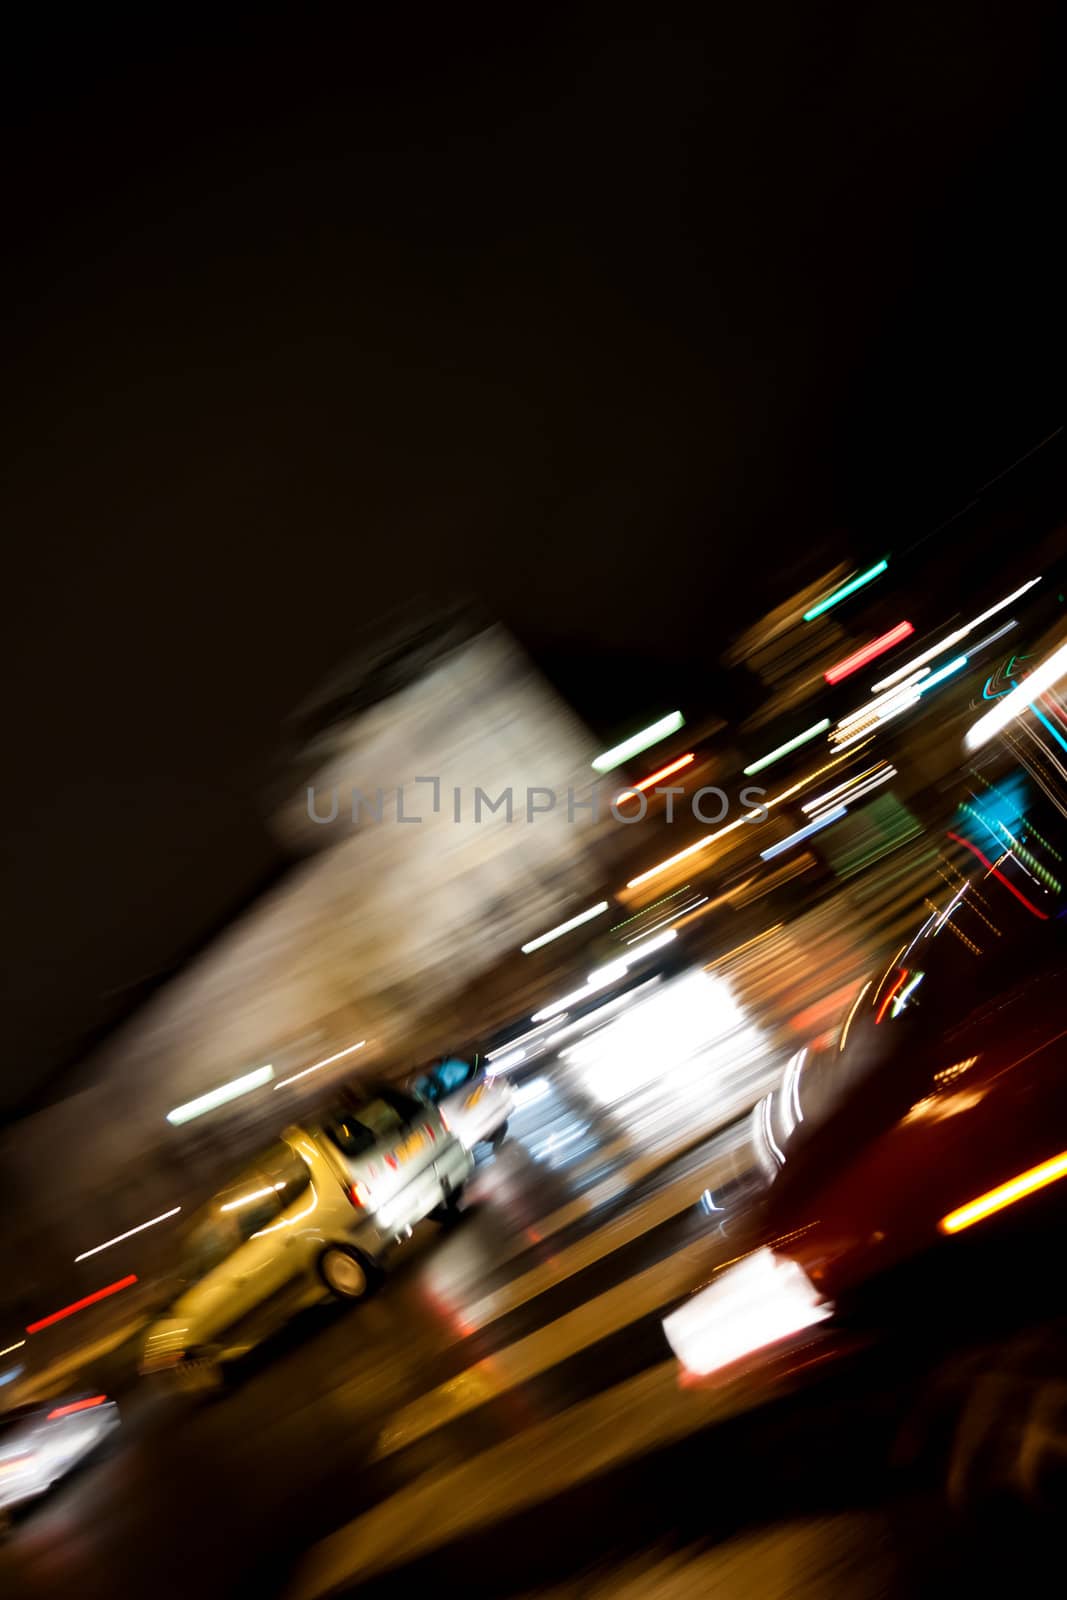 Traffic at Night by pcusine